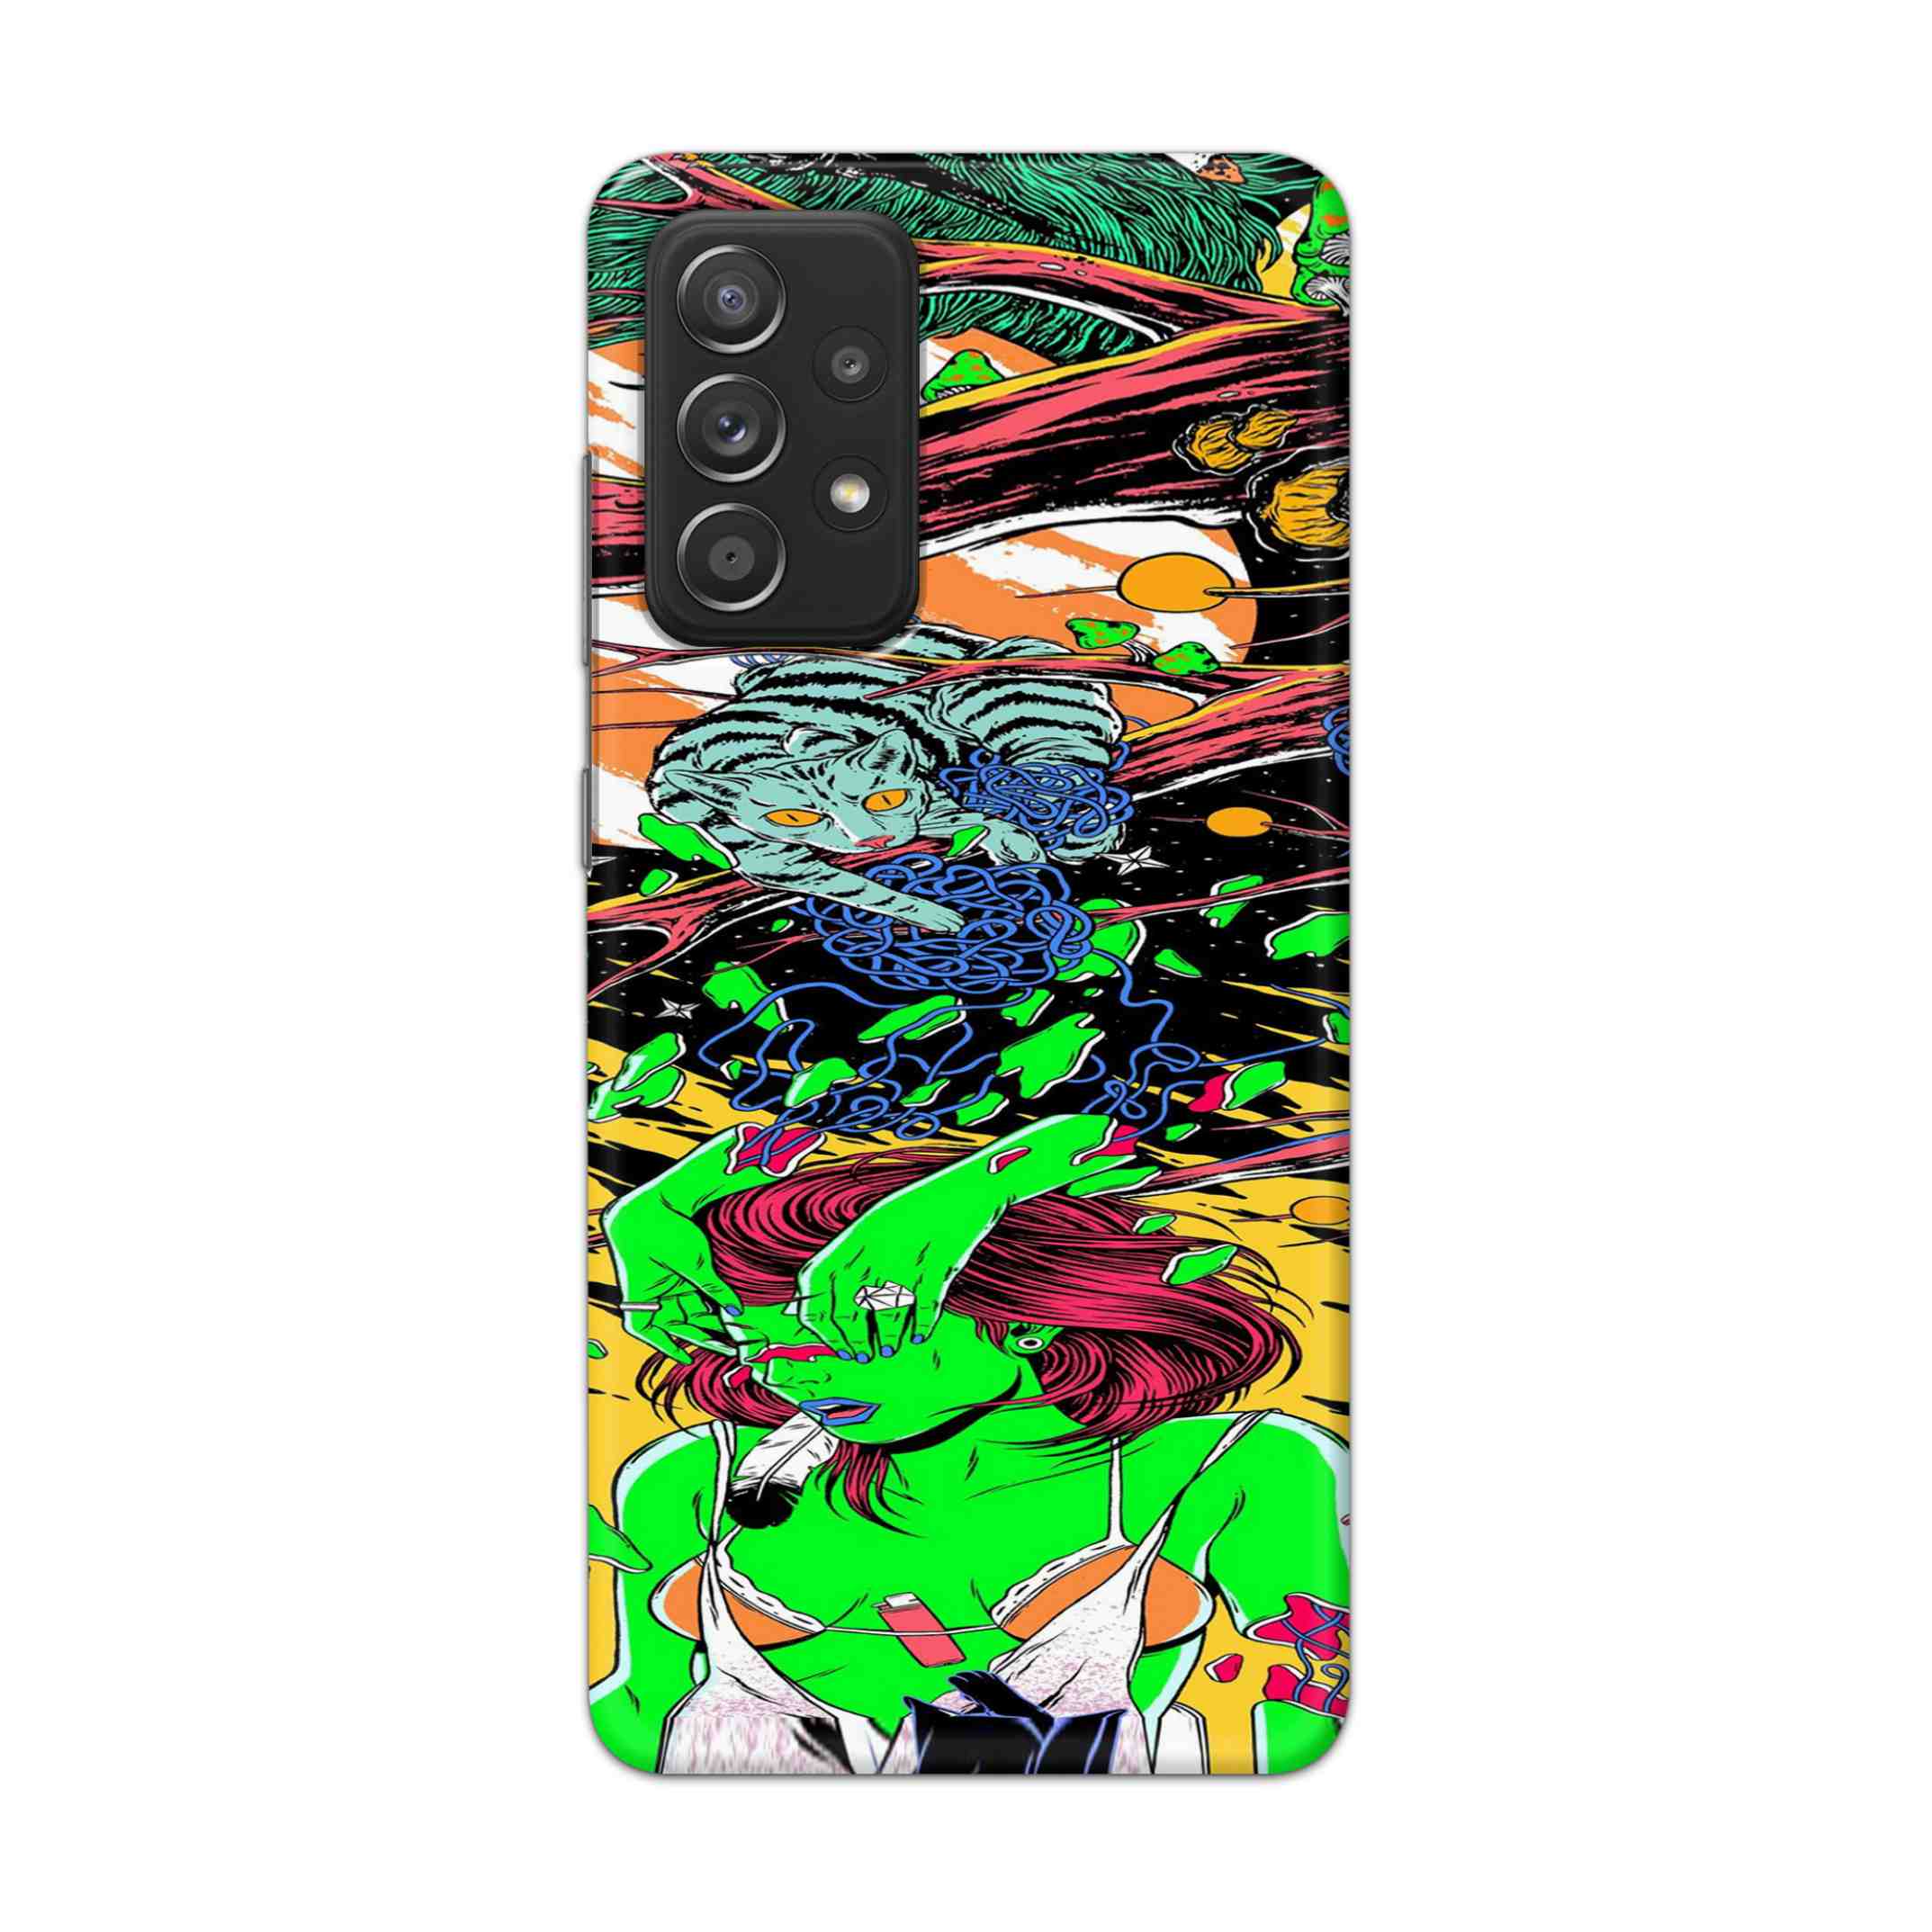 Buy Green Girl Art Hard Back Mobile Phone Case Cover For Samsung Galaxy A52 Online